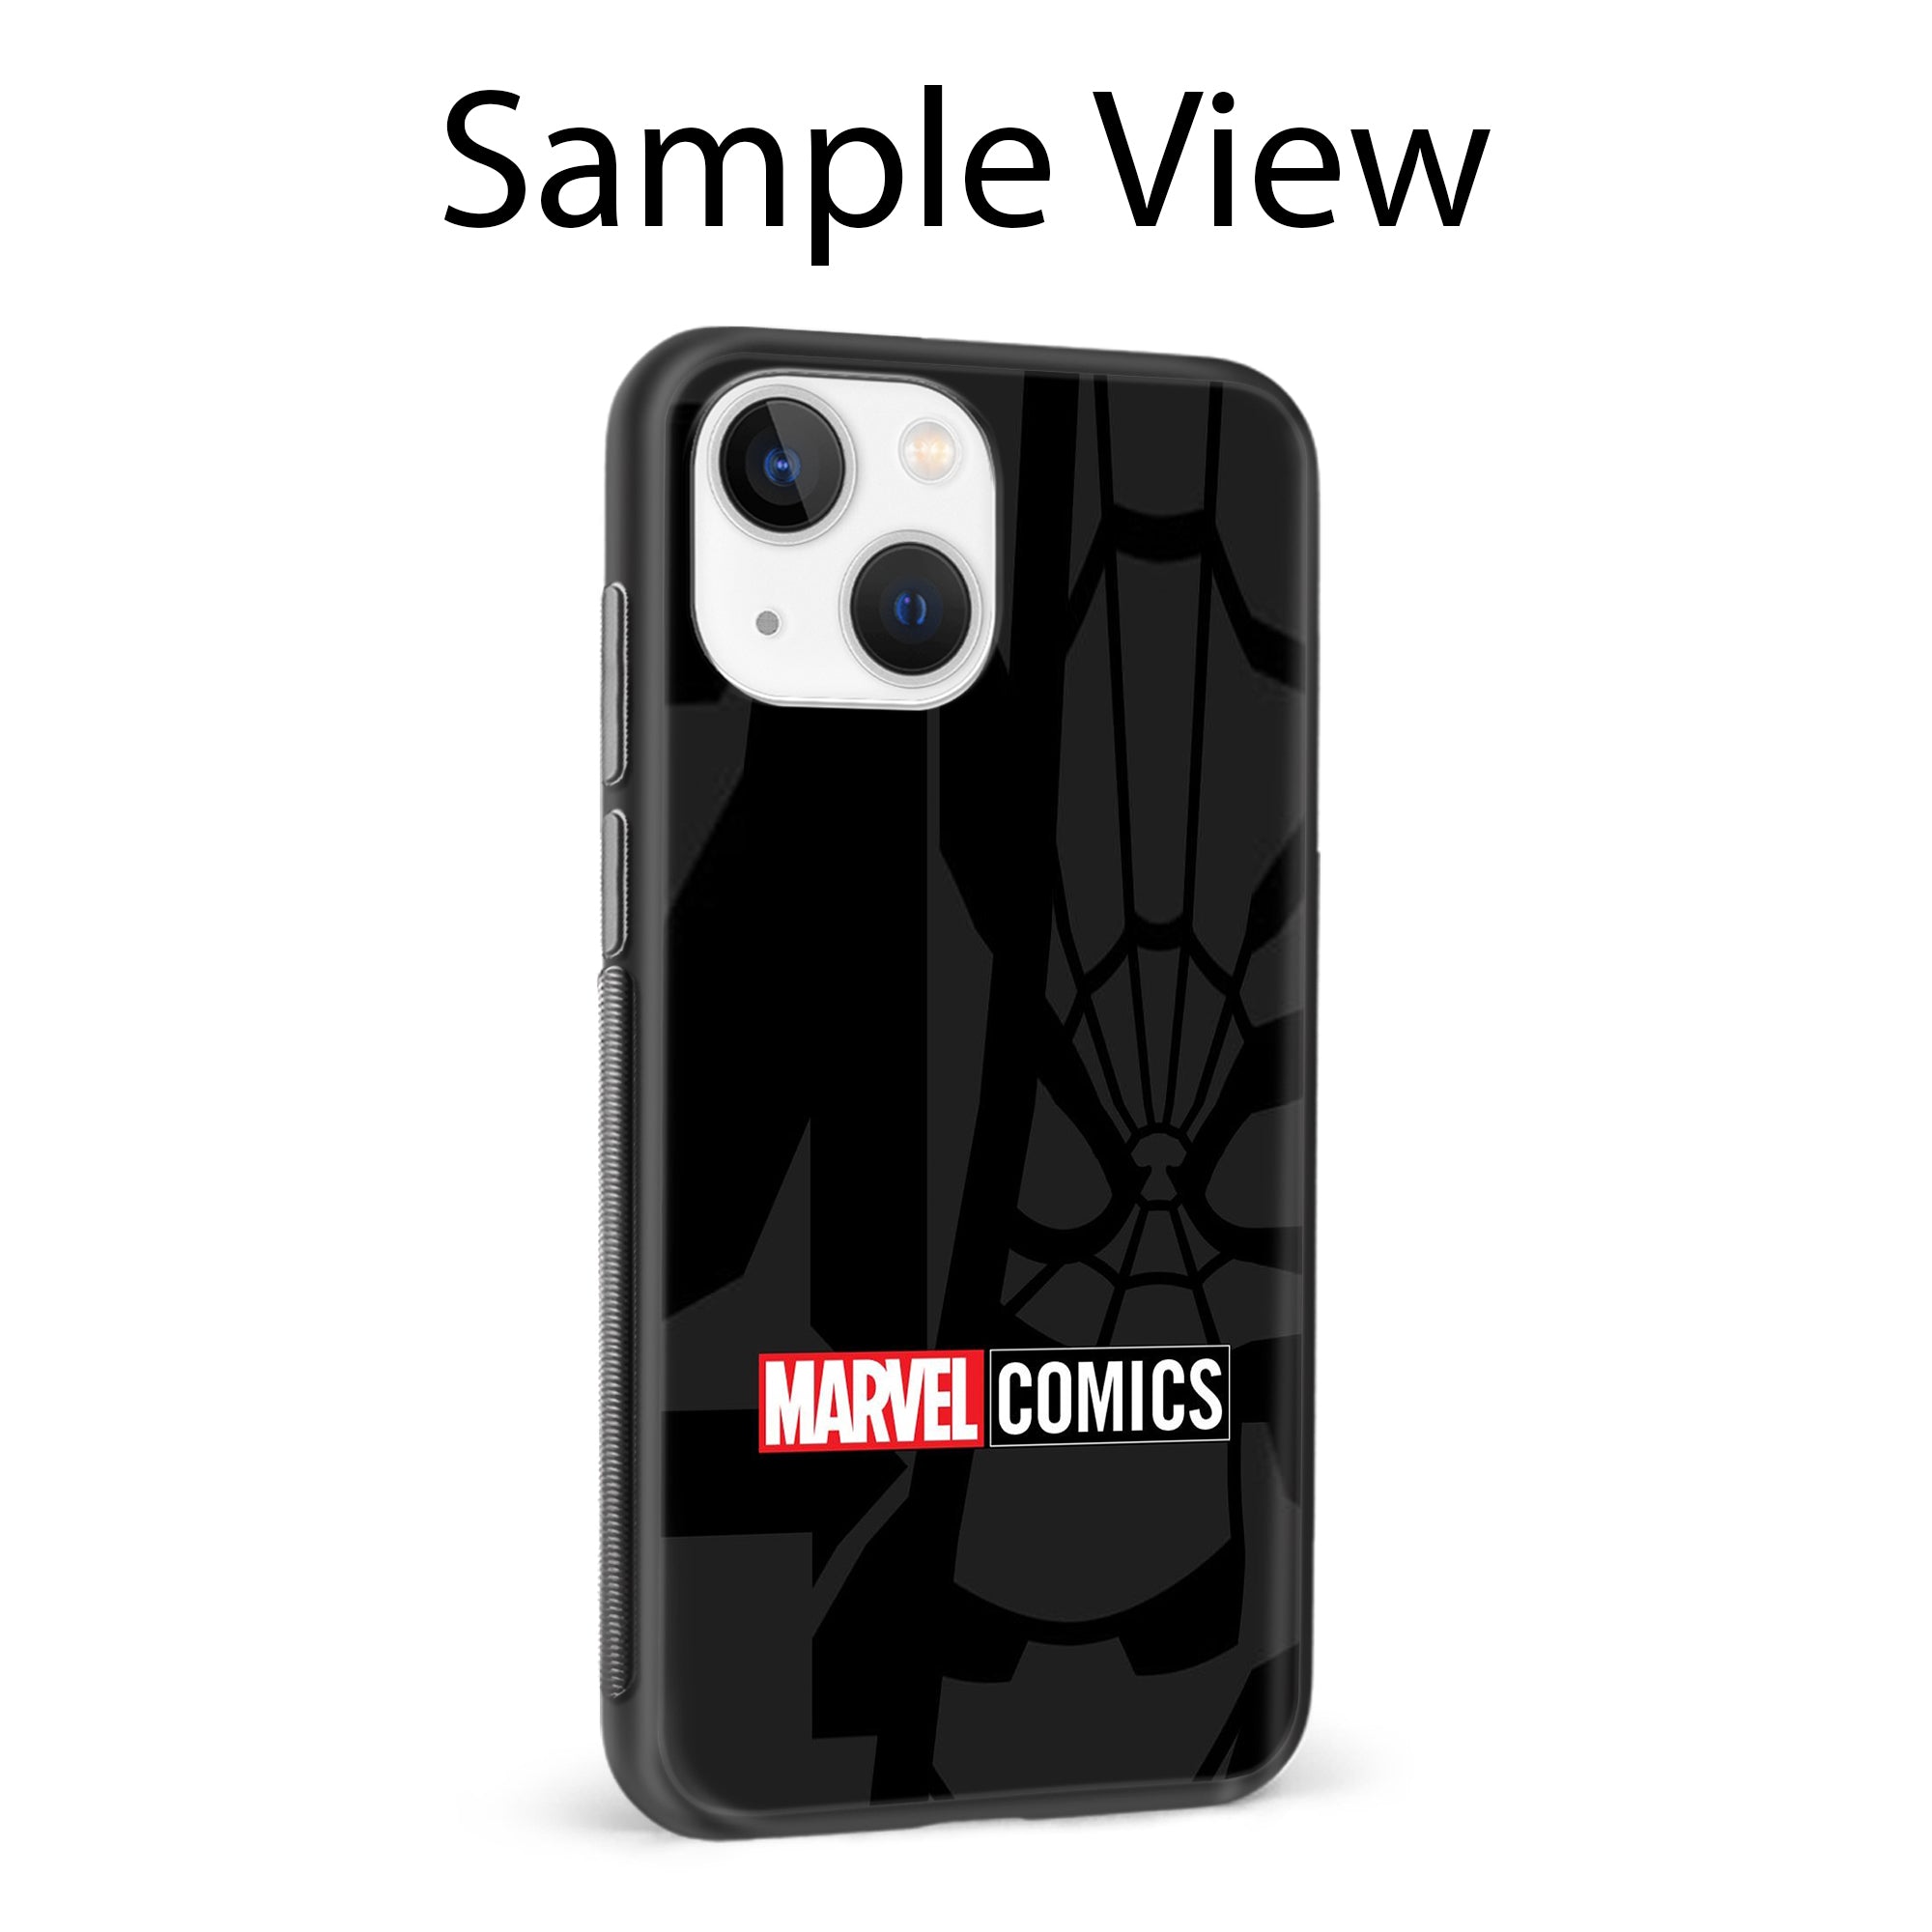 Buy Marvel Comics Glass/Metal Back Mobile Phone Case/Cover For Apple iPhone 12 pro Online